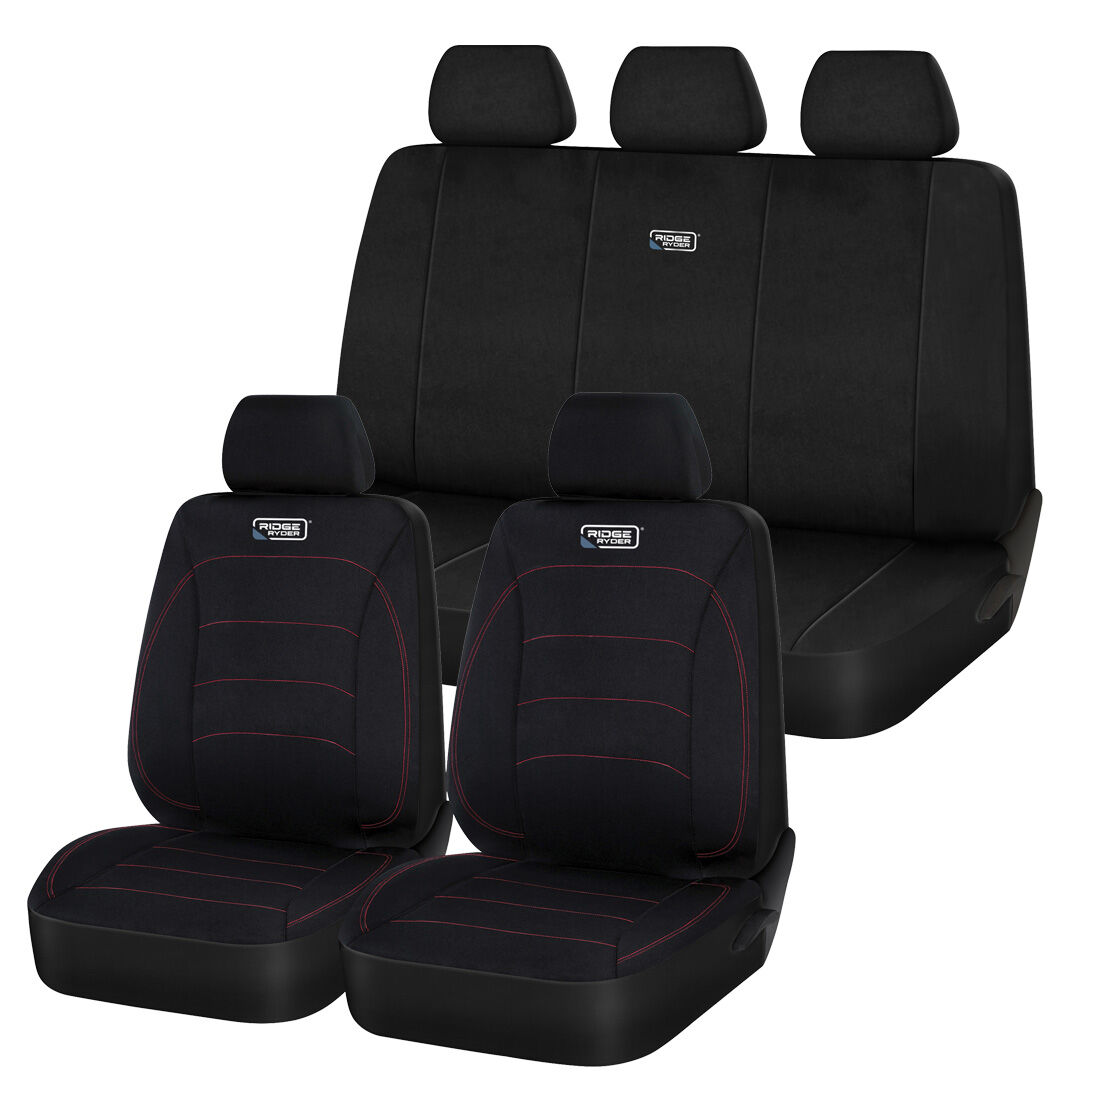 Type S Wetsuit Rear Bench Seat Protector with Dri-Lock Technology